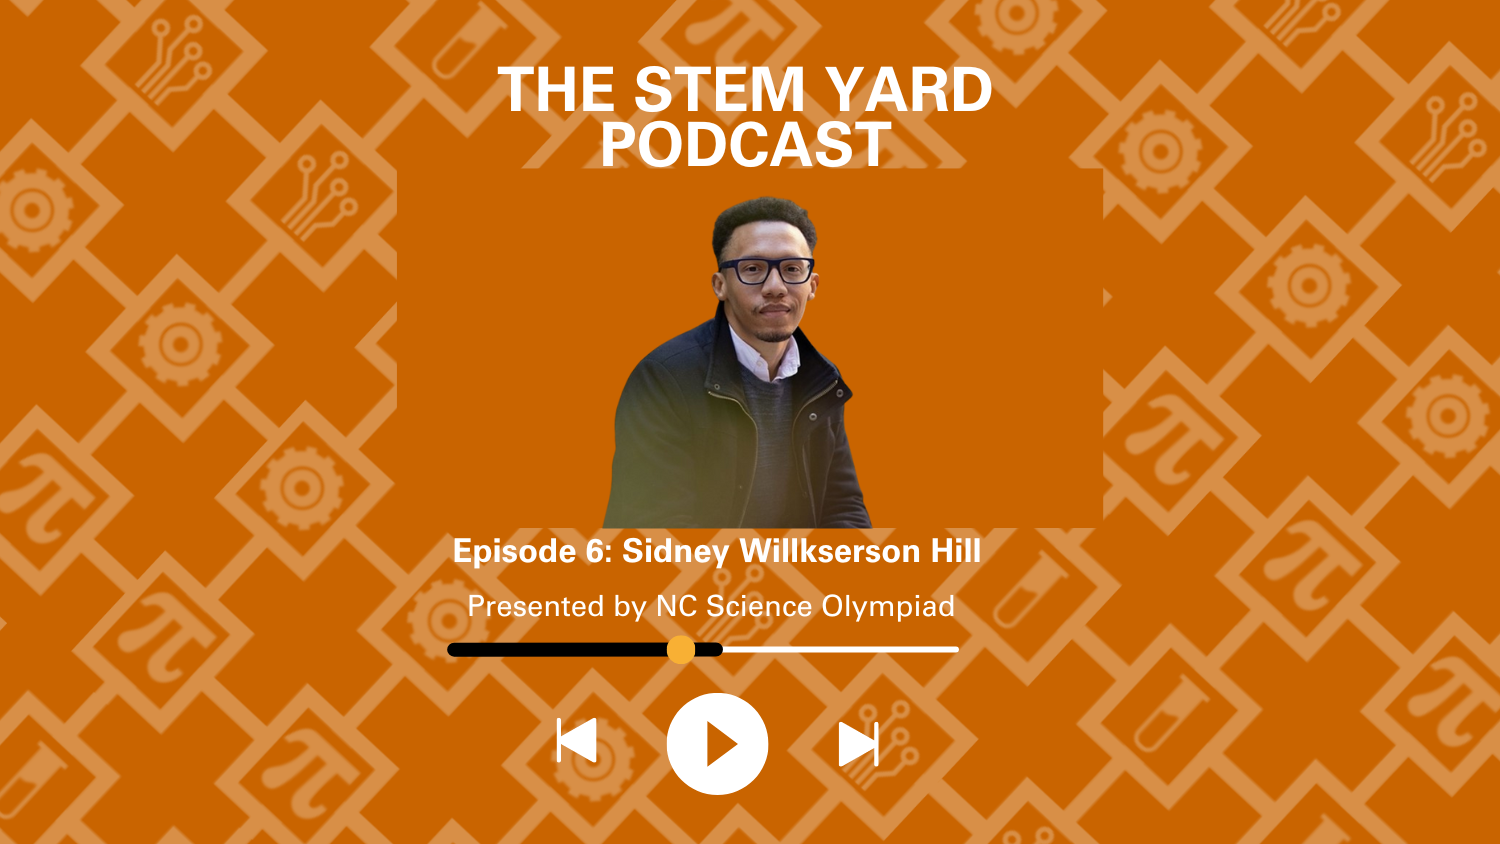 The STEM Yard - Episode 6 with Sidney Wilkerson Hill